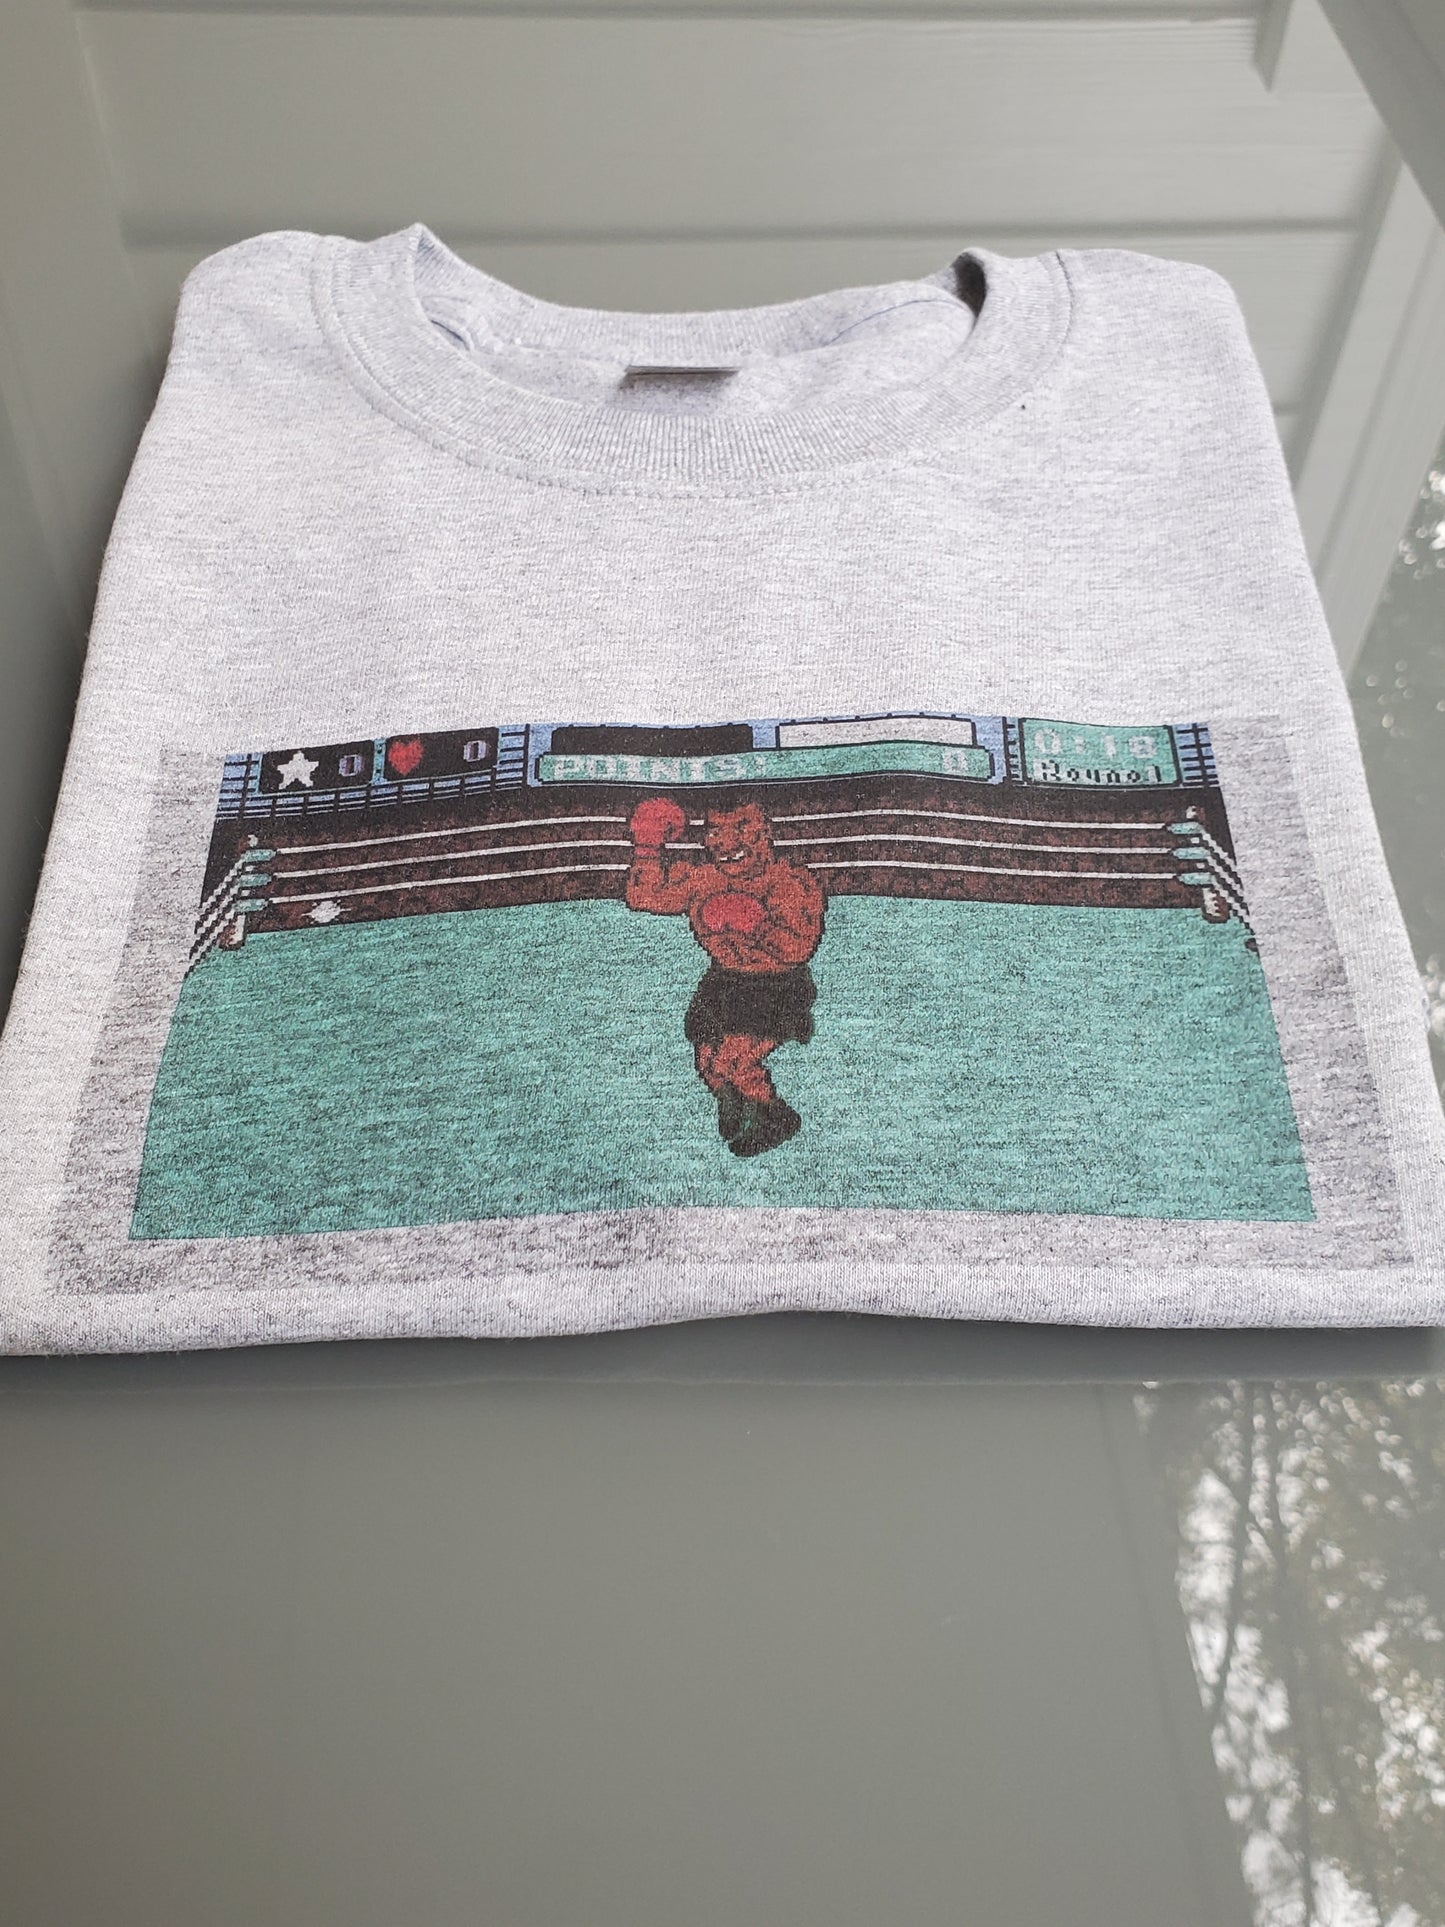 Retro Mike Tyson Punch Out T-Shirt - Centre Ave Clothing Co.